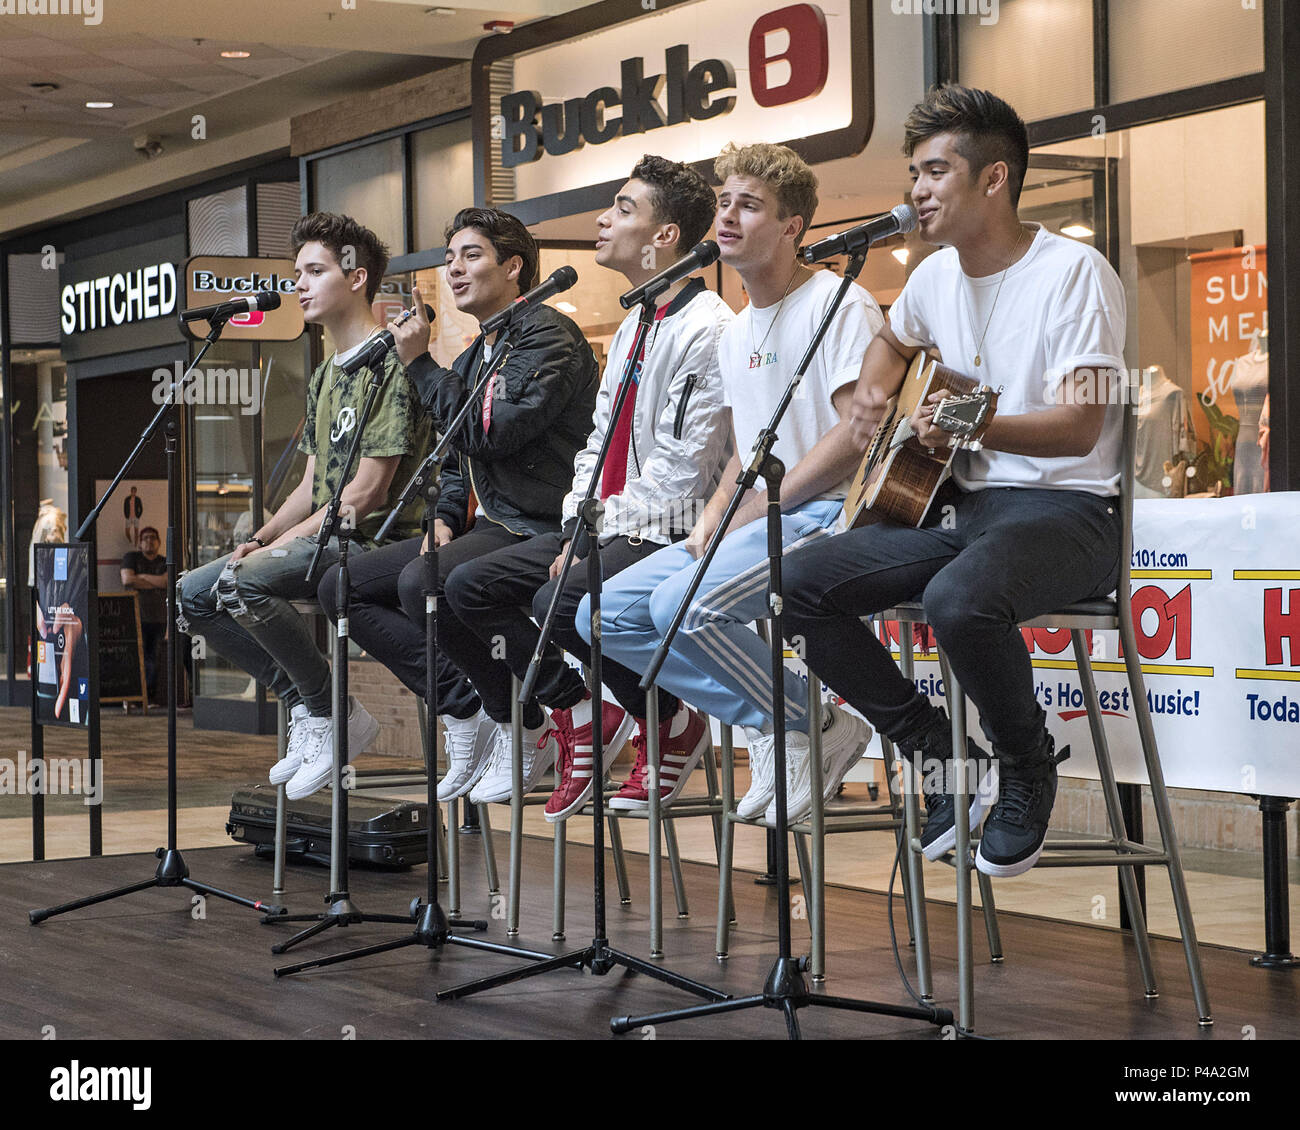 Youngstown, OH, USA. 20th June, 2018. 20 June 2018 - Youngstown, Ohio - Hollywood Records recording artists IN REAL LIFE perform a few of their hits for their fans at the Southern Park Mall. The boy band composed of (left to right) Michael Conor, Chance Perez, Drew Ramos, Brady Tutton and Sergio Calderon, were the five finalists from the ABC reality music television competition series BOY BAND. Photo Credit: Jason L. Nelson/AdMedia Credit: Jason L. Nelson/AdMedia/ZUMA Wire/Alamy Live News Stock Photo